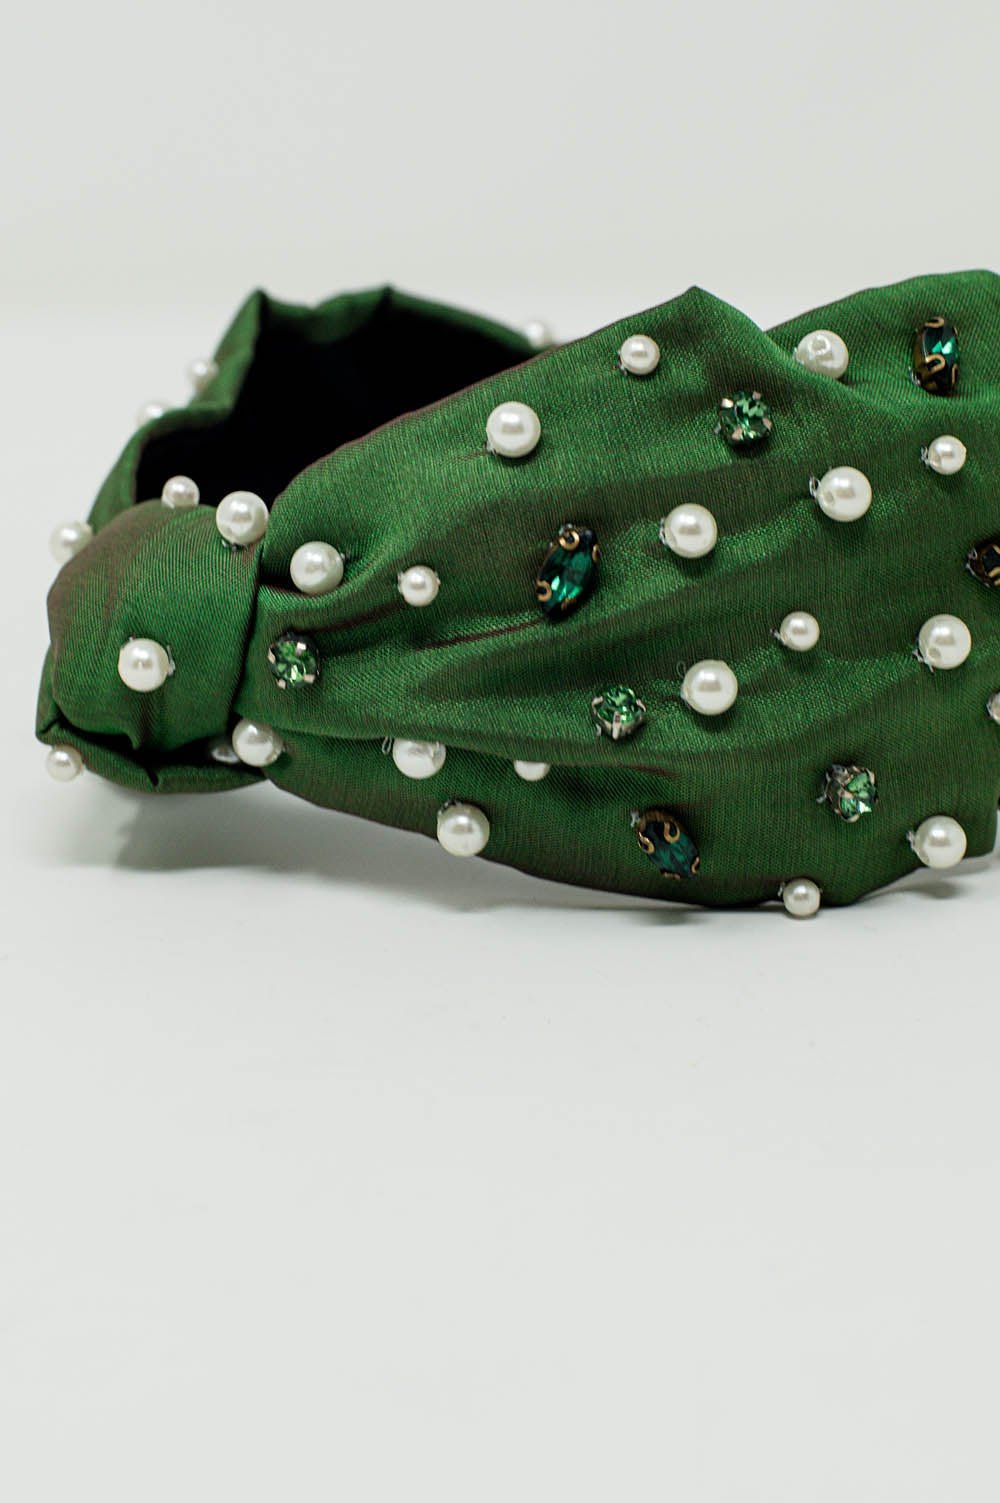 Embellished Headband With White and Green Jewells With Knot in the Middle - Mack & Harvie